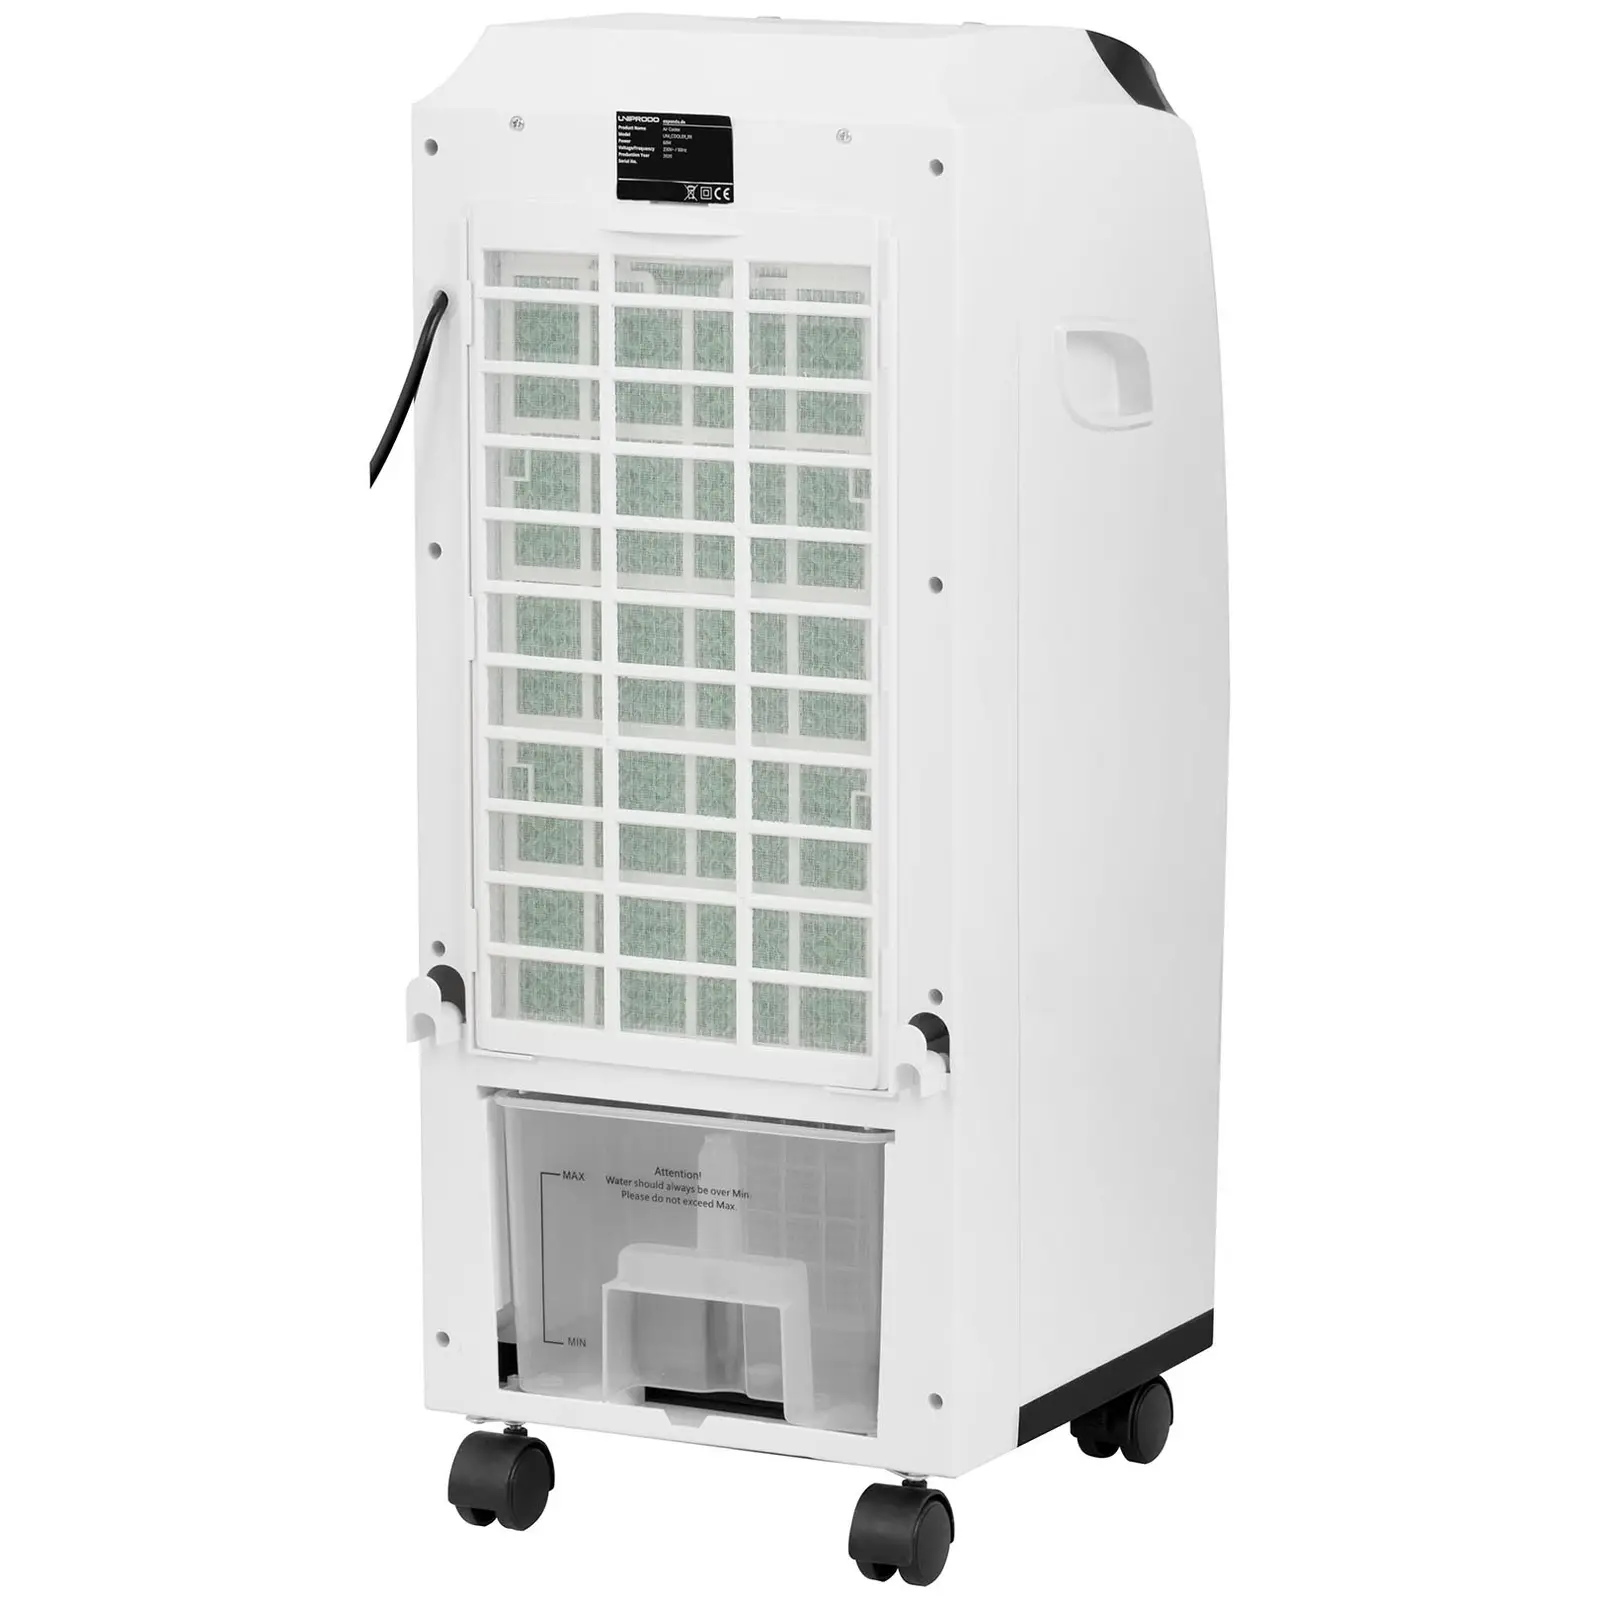 Air Cooler - 7 L water tank - remote control - 3 in 1